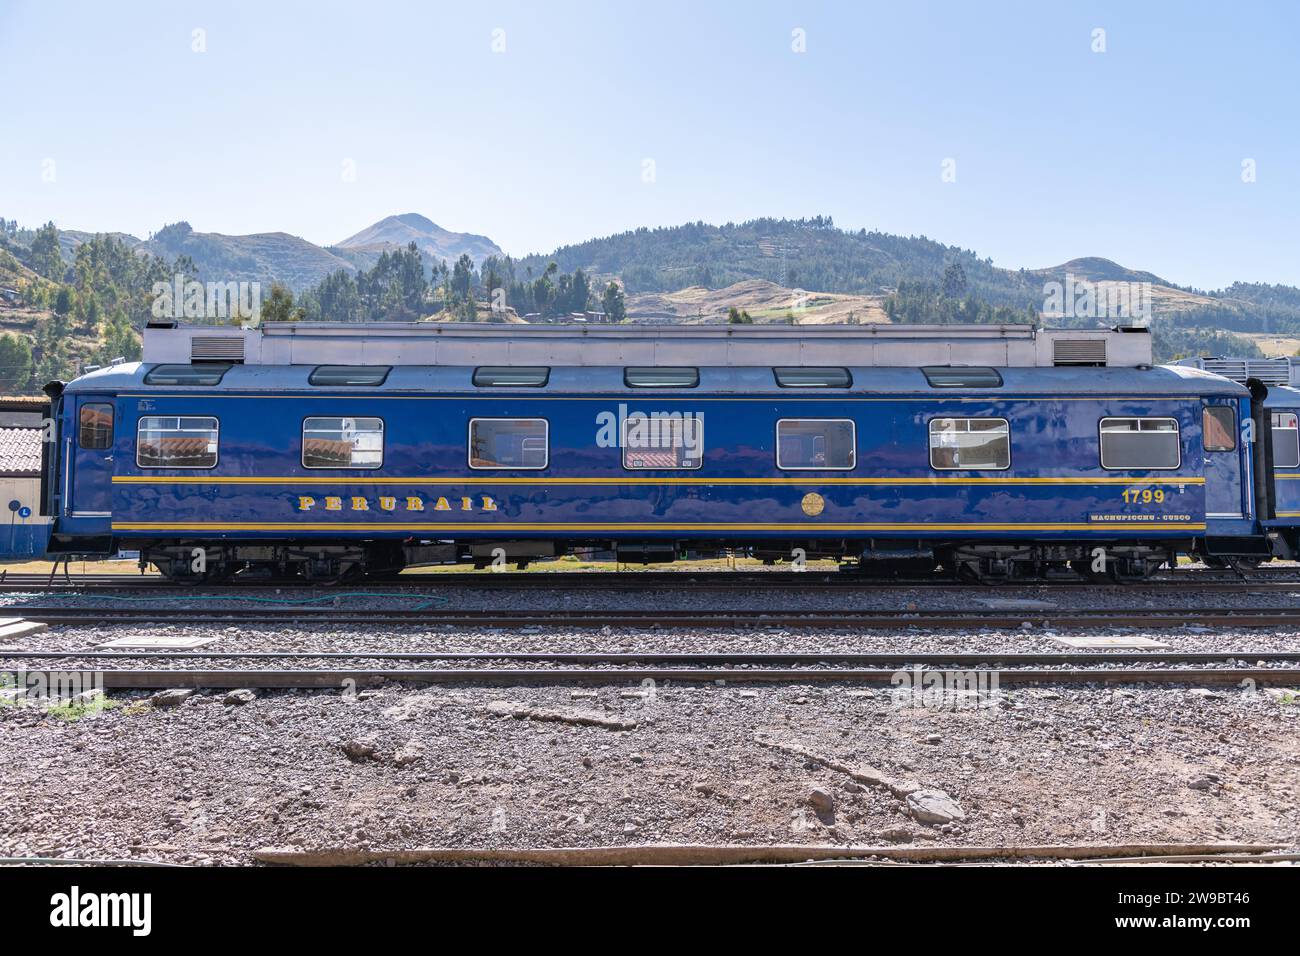 The Perurail train carriage on a railway track at Poroy Station in Cusco, Peru Stock Photo